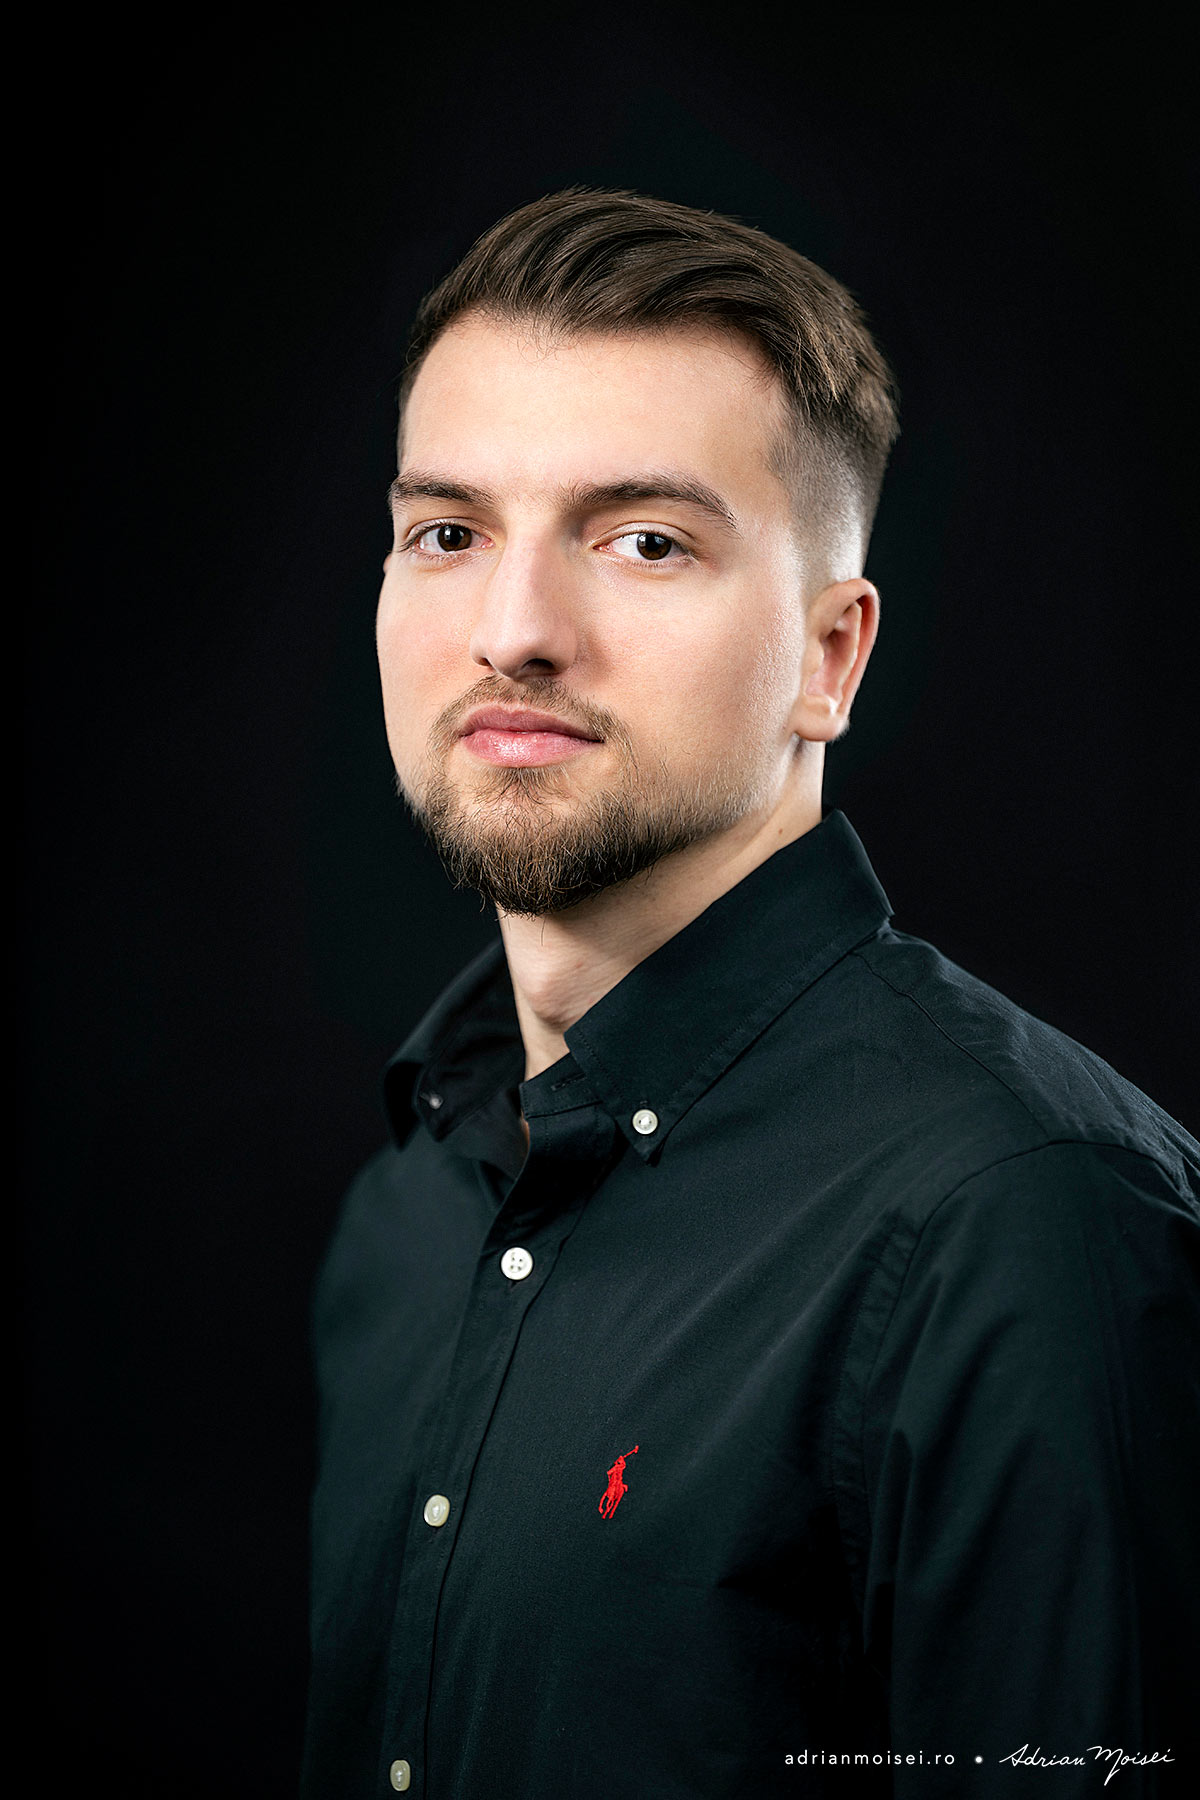 Profile photos for skilled freelancer in web solutions for Web and Mobile - Dan Diaconu - at fotograf Iasi - Adrian Moisei